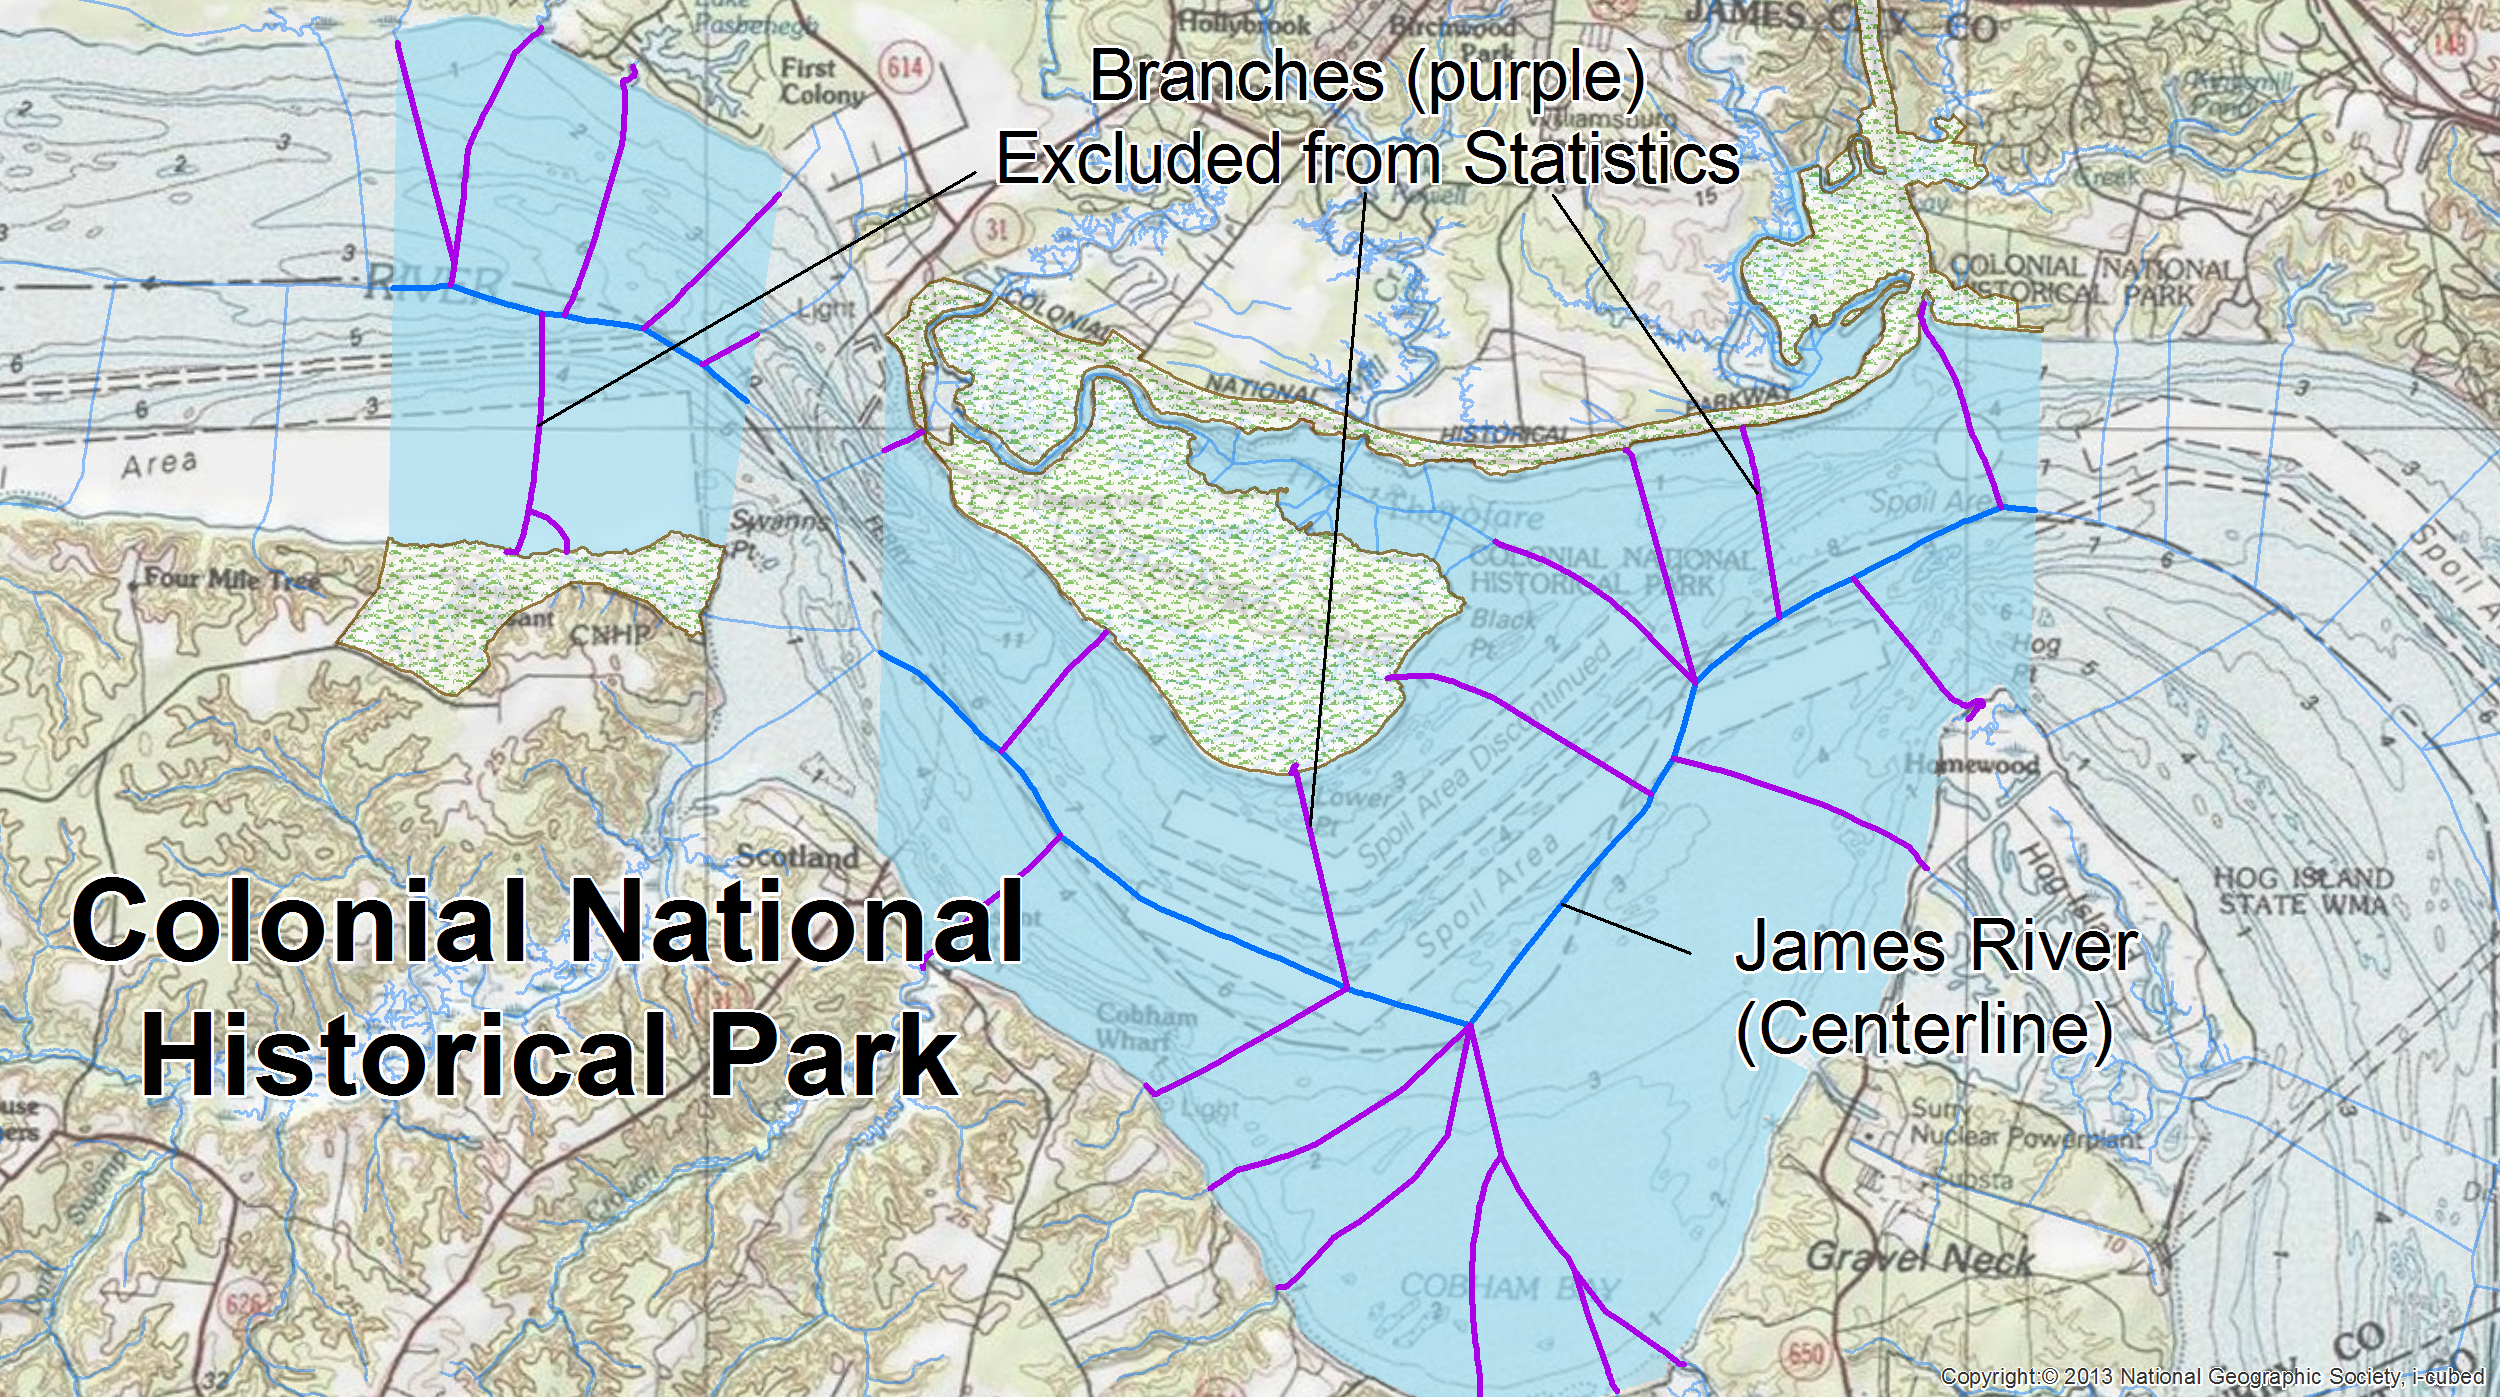 Flowline "branches" (purple) exist in NHD to enforce network connectivity in order to model water flow. They were not tagged as centerlines and, consequently, were excluded from the park's hydrographic statistics.